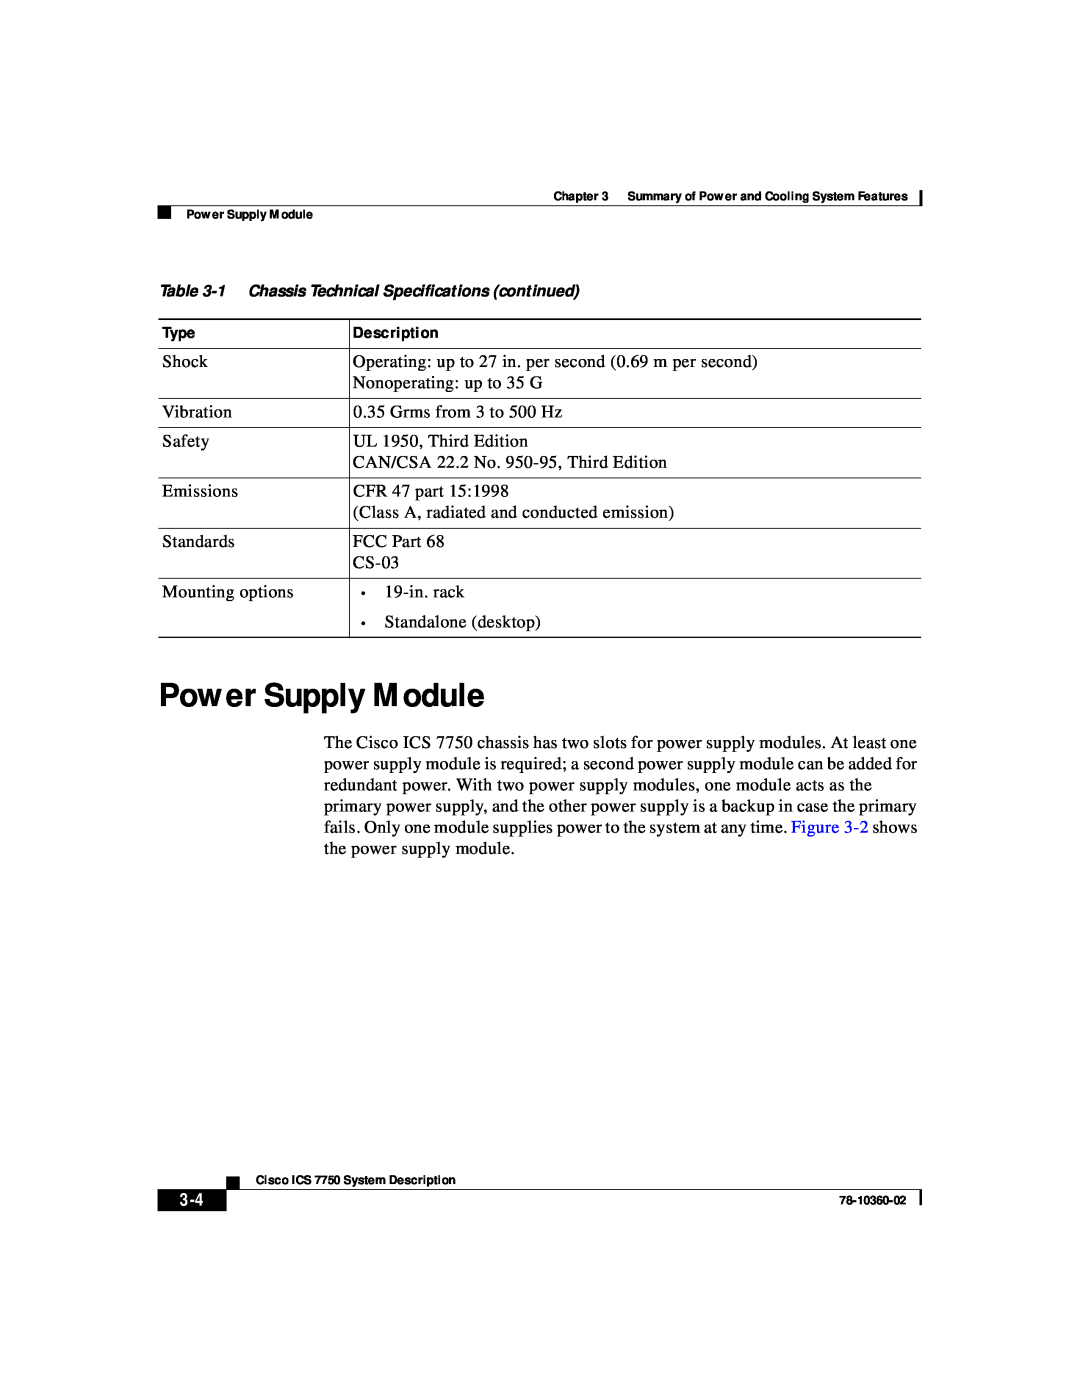 Cisco Systems ICS-7750 manual Power Supply Module, 1 Chassis Technical Specifications continued 